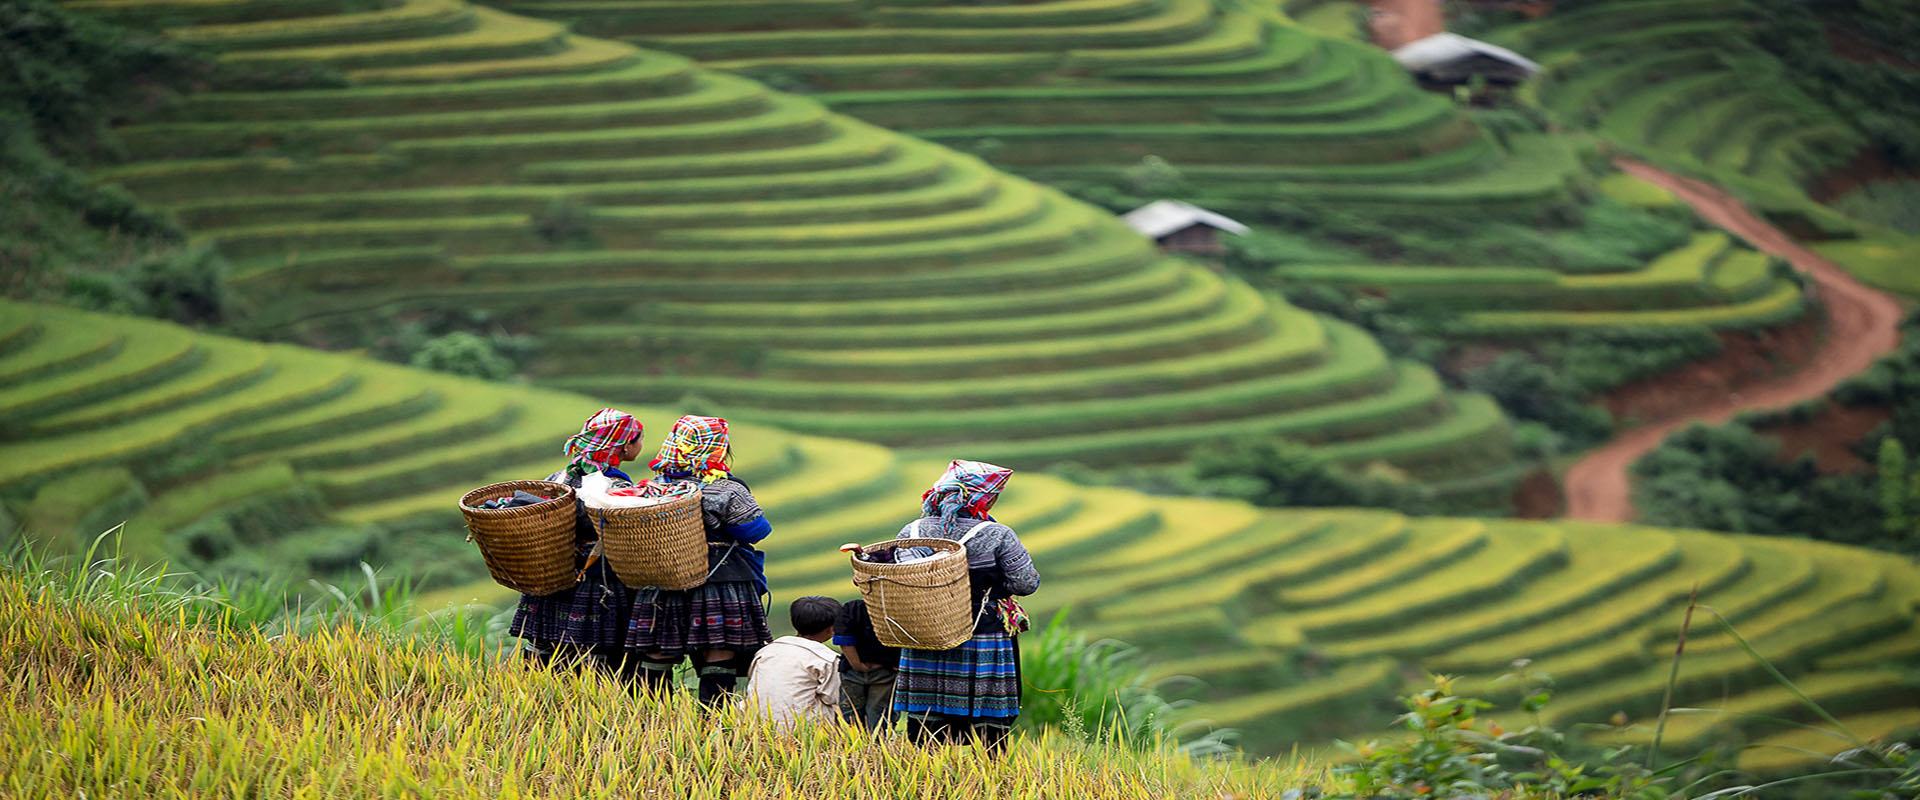 In the days of August, the whole sky of Sapa seems to be bright with the brilliant yellow of the blooming rice